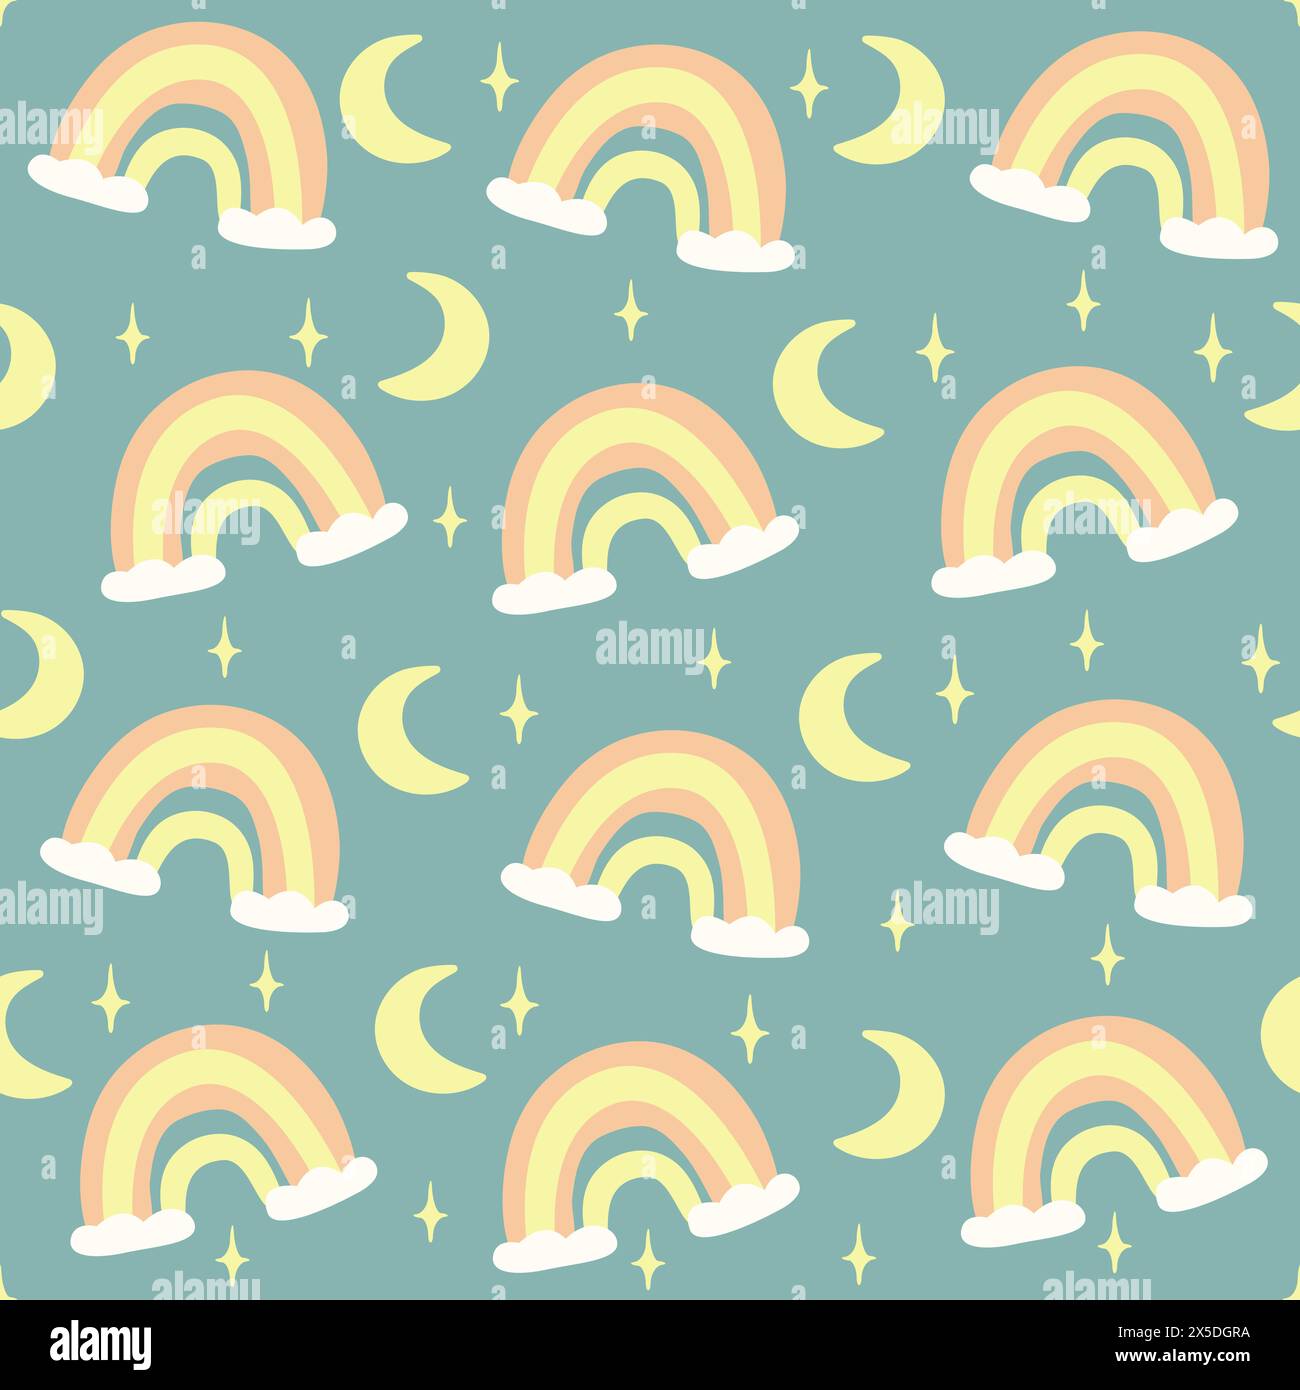 Seamless childish pattern with hand drawn rainbows and stars. Creative scandinavian kids texture. Different size elements endless texture. Vector endl Stock Vector